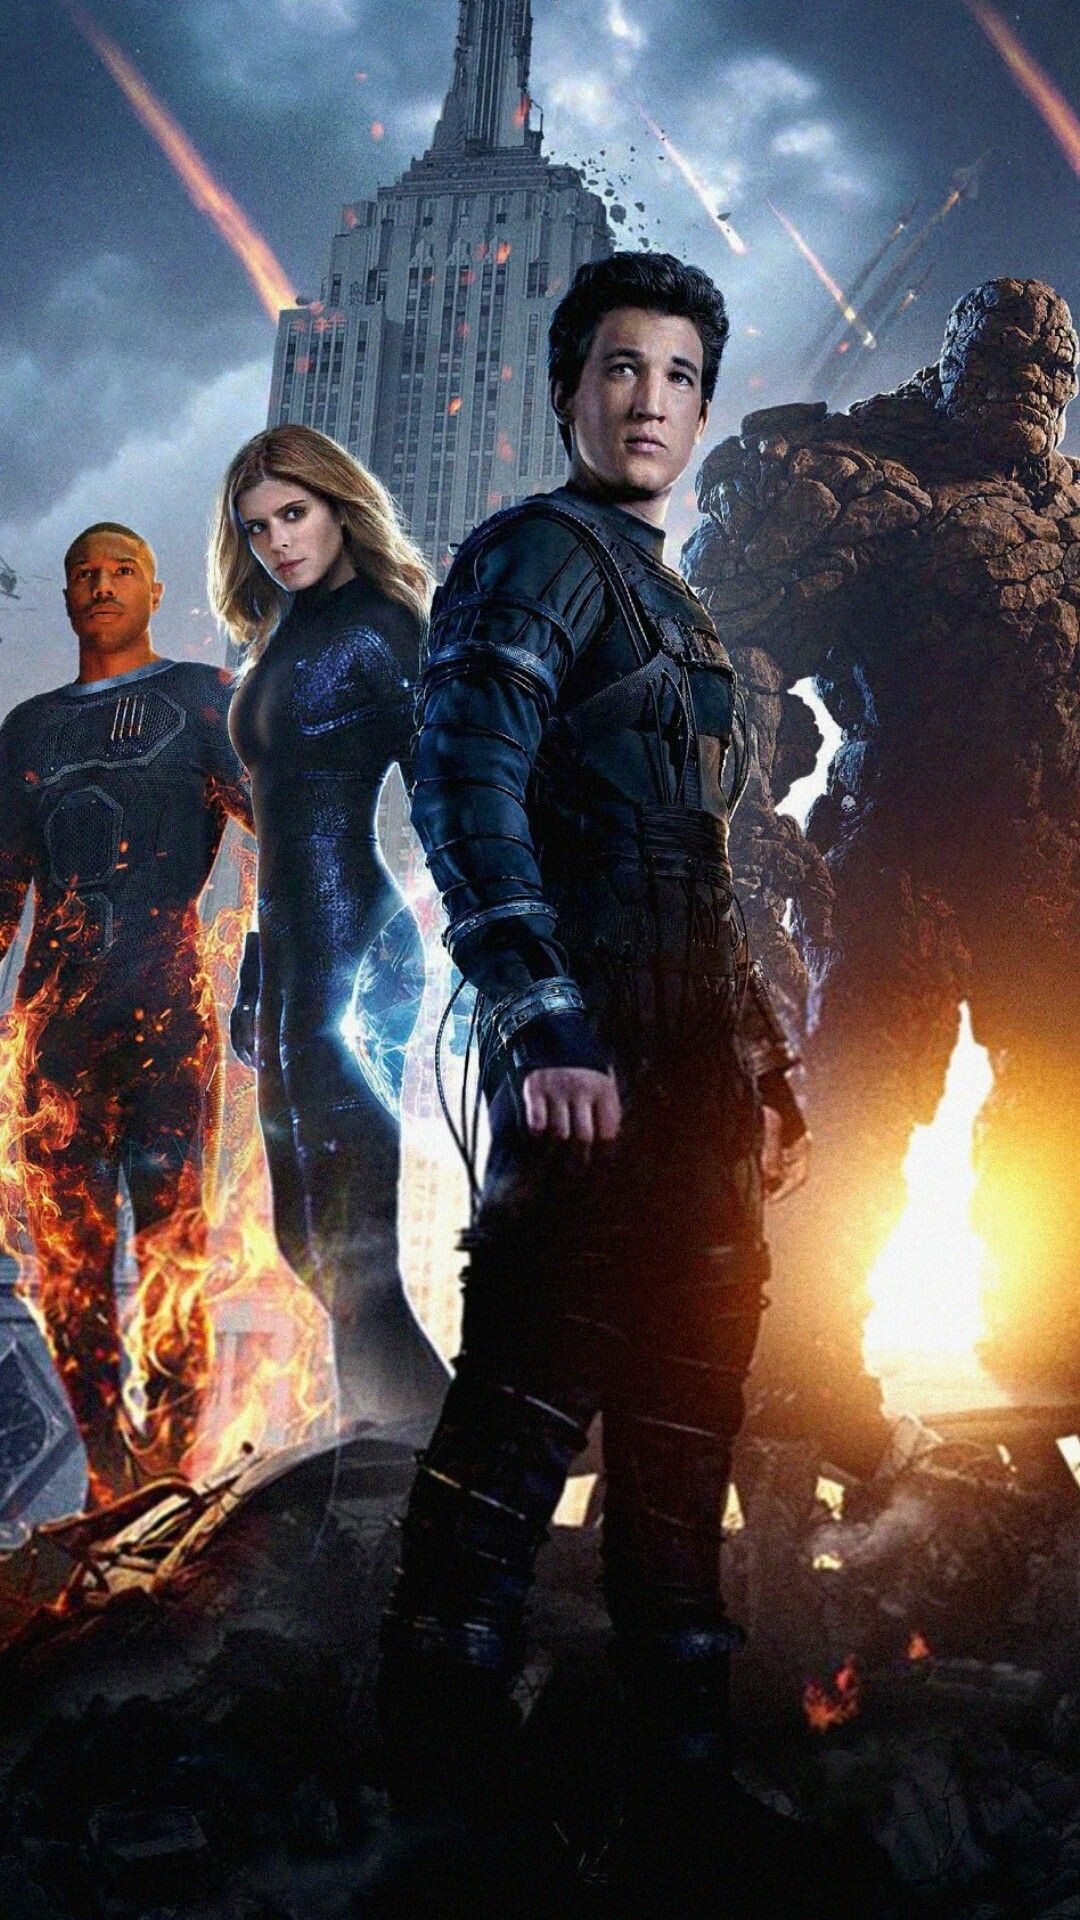 Fantastic 4: Four young outsiders gain superhuman powers as they alter their physical form in shocking ways. 1080x1920 Full HD Wallpaper.